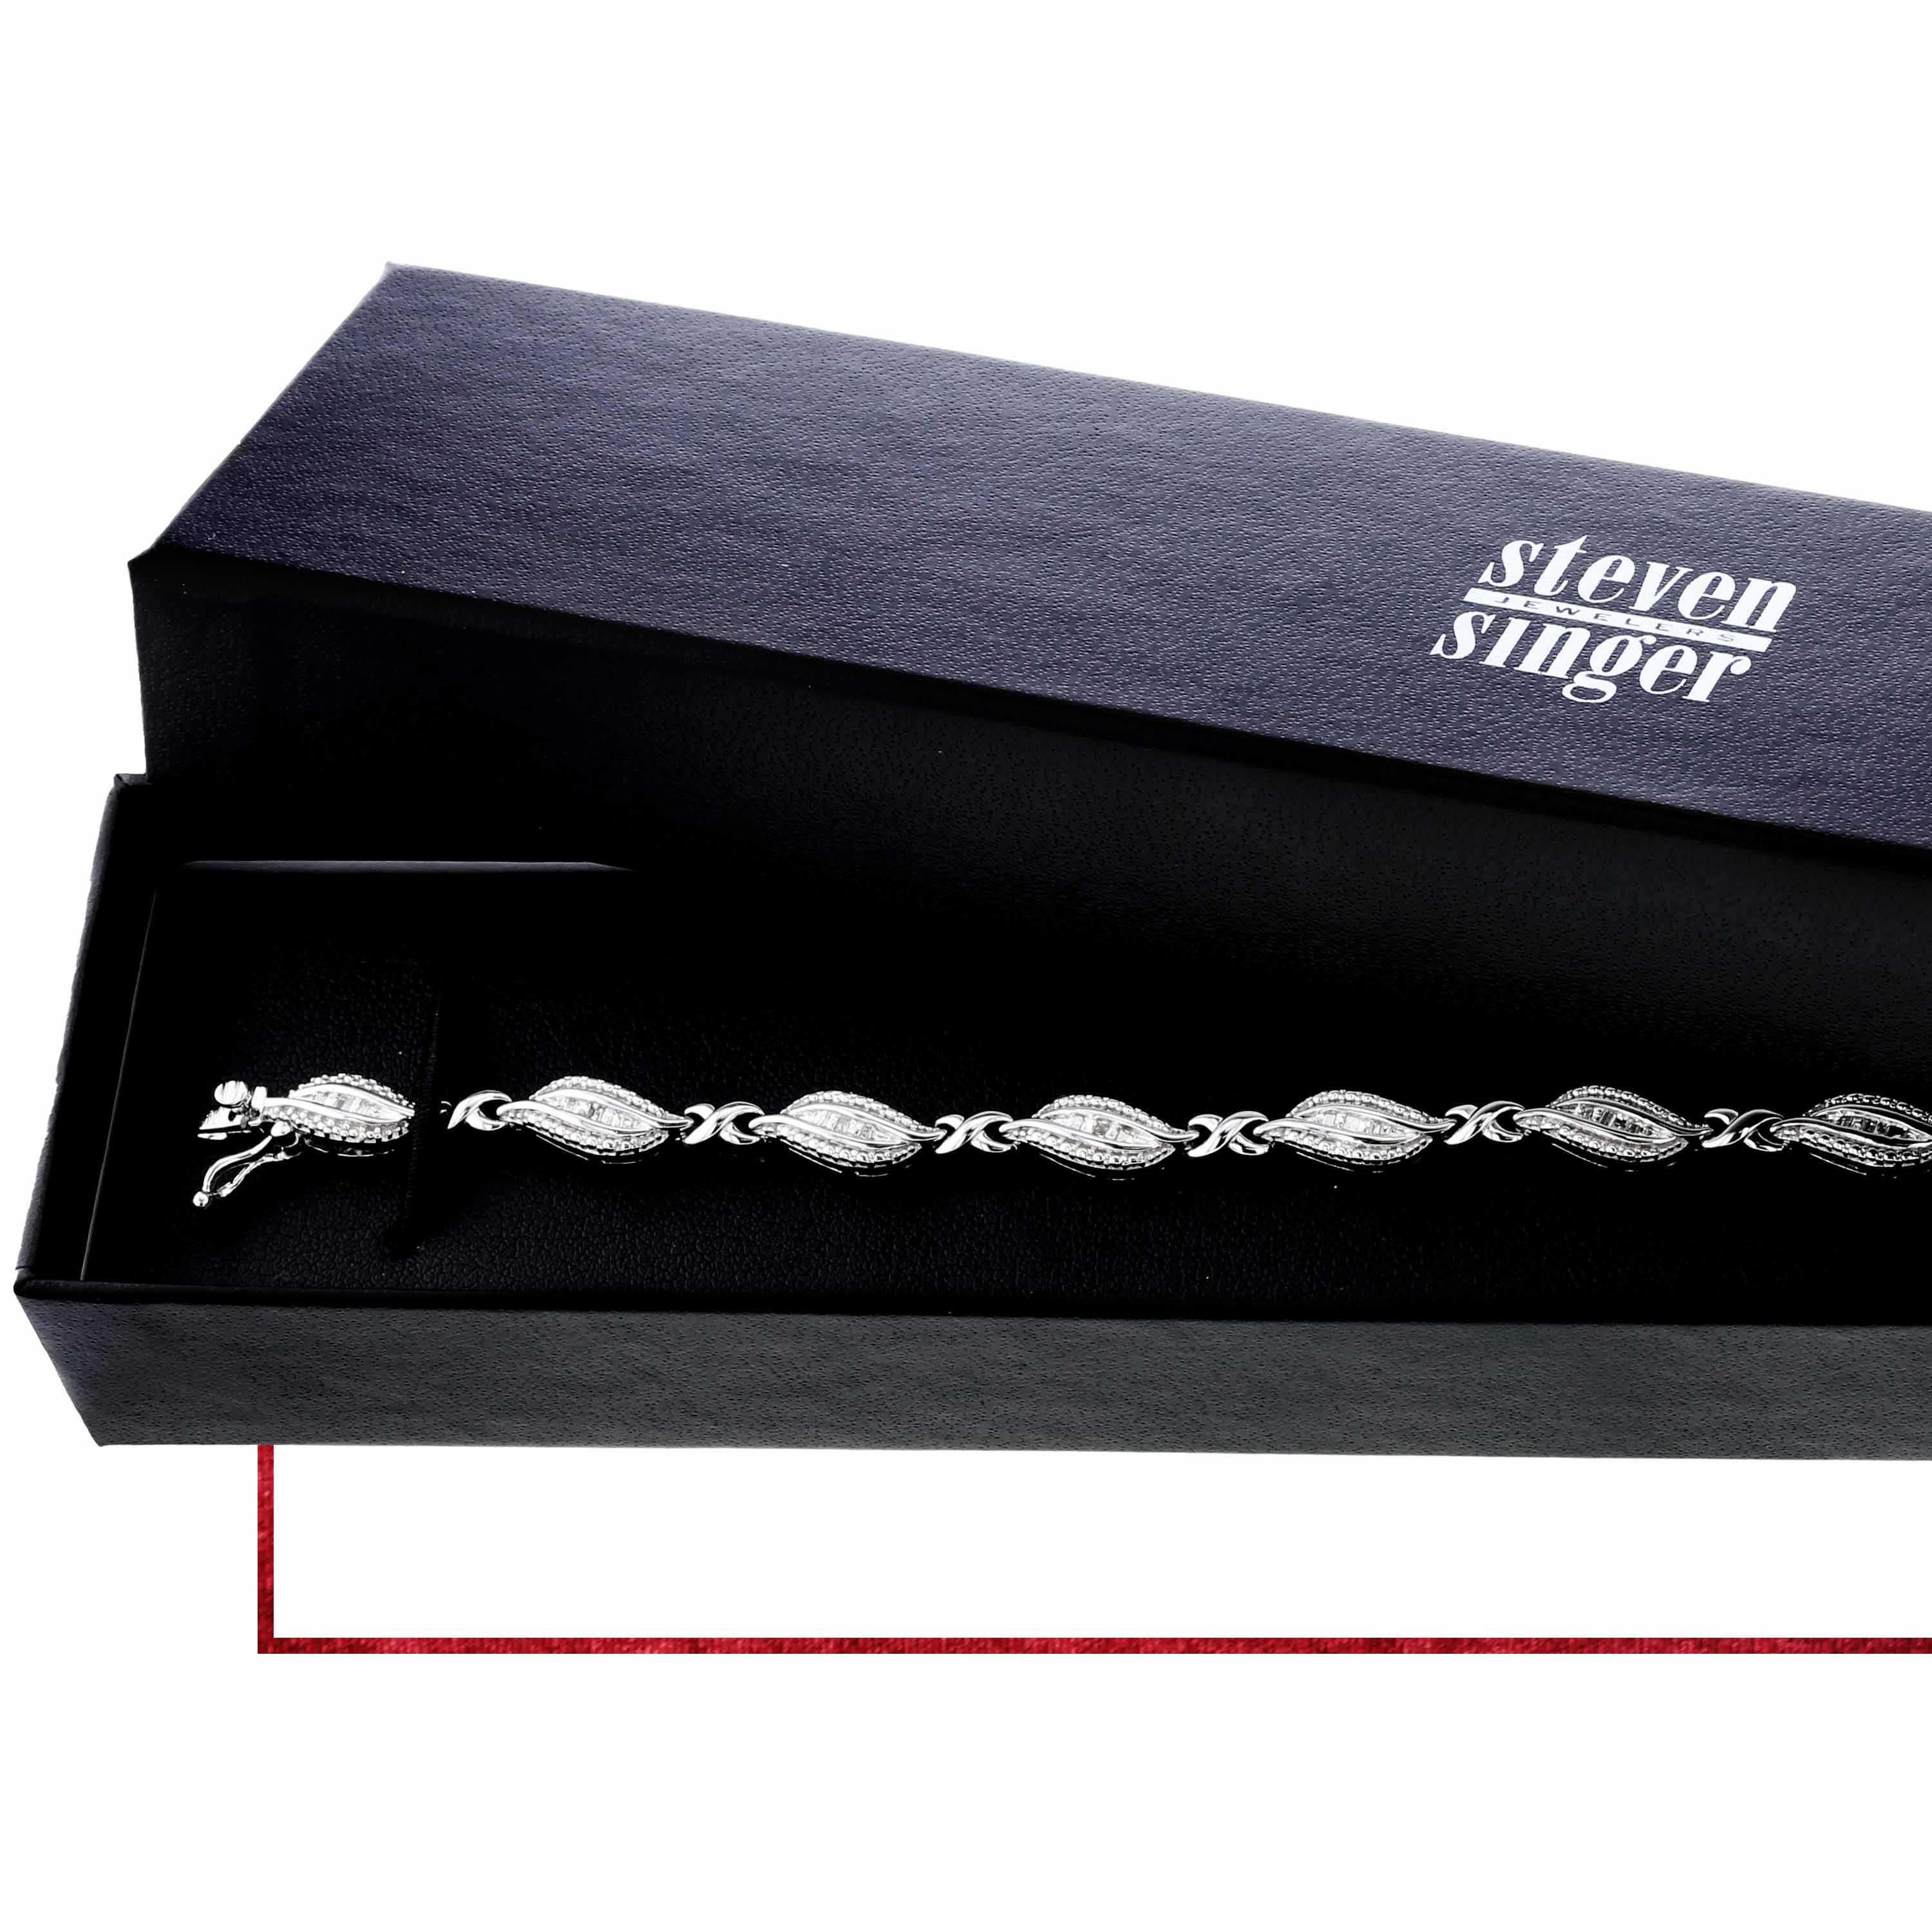 Our At Last Diamond Bracelet pictured in our Signature Steven Singer Black Gift Box.